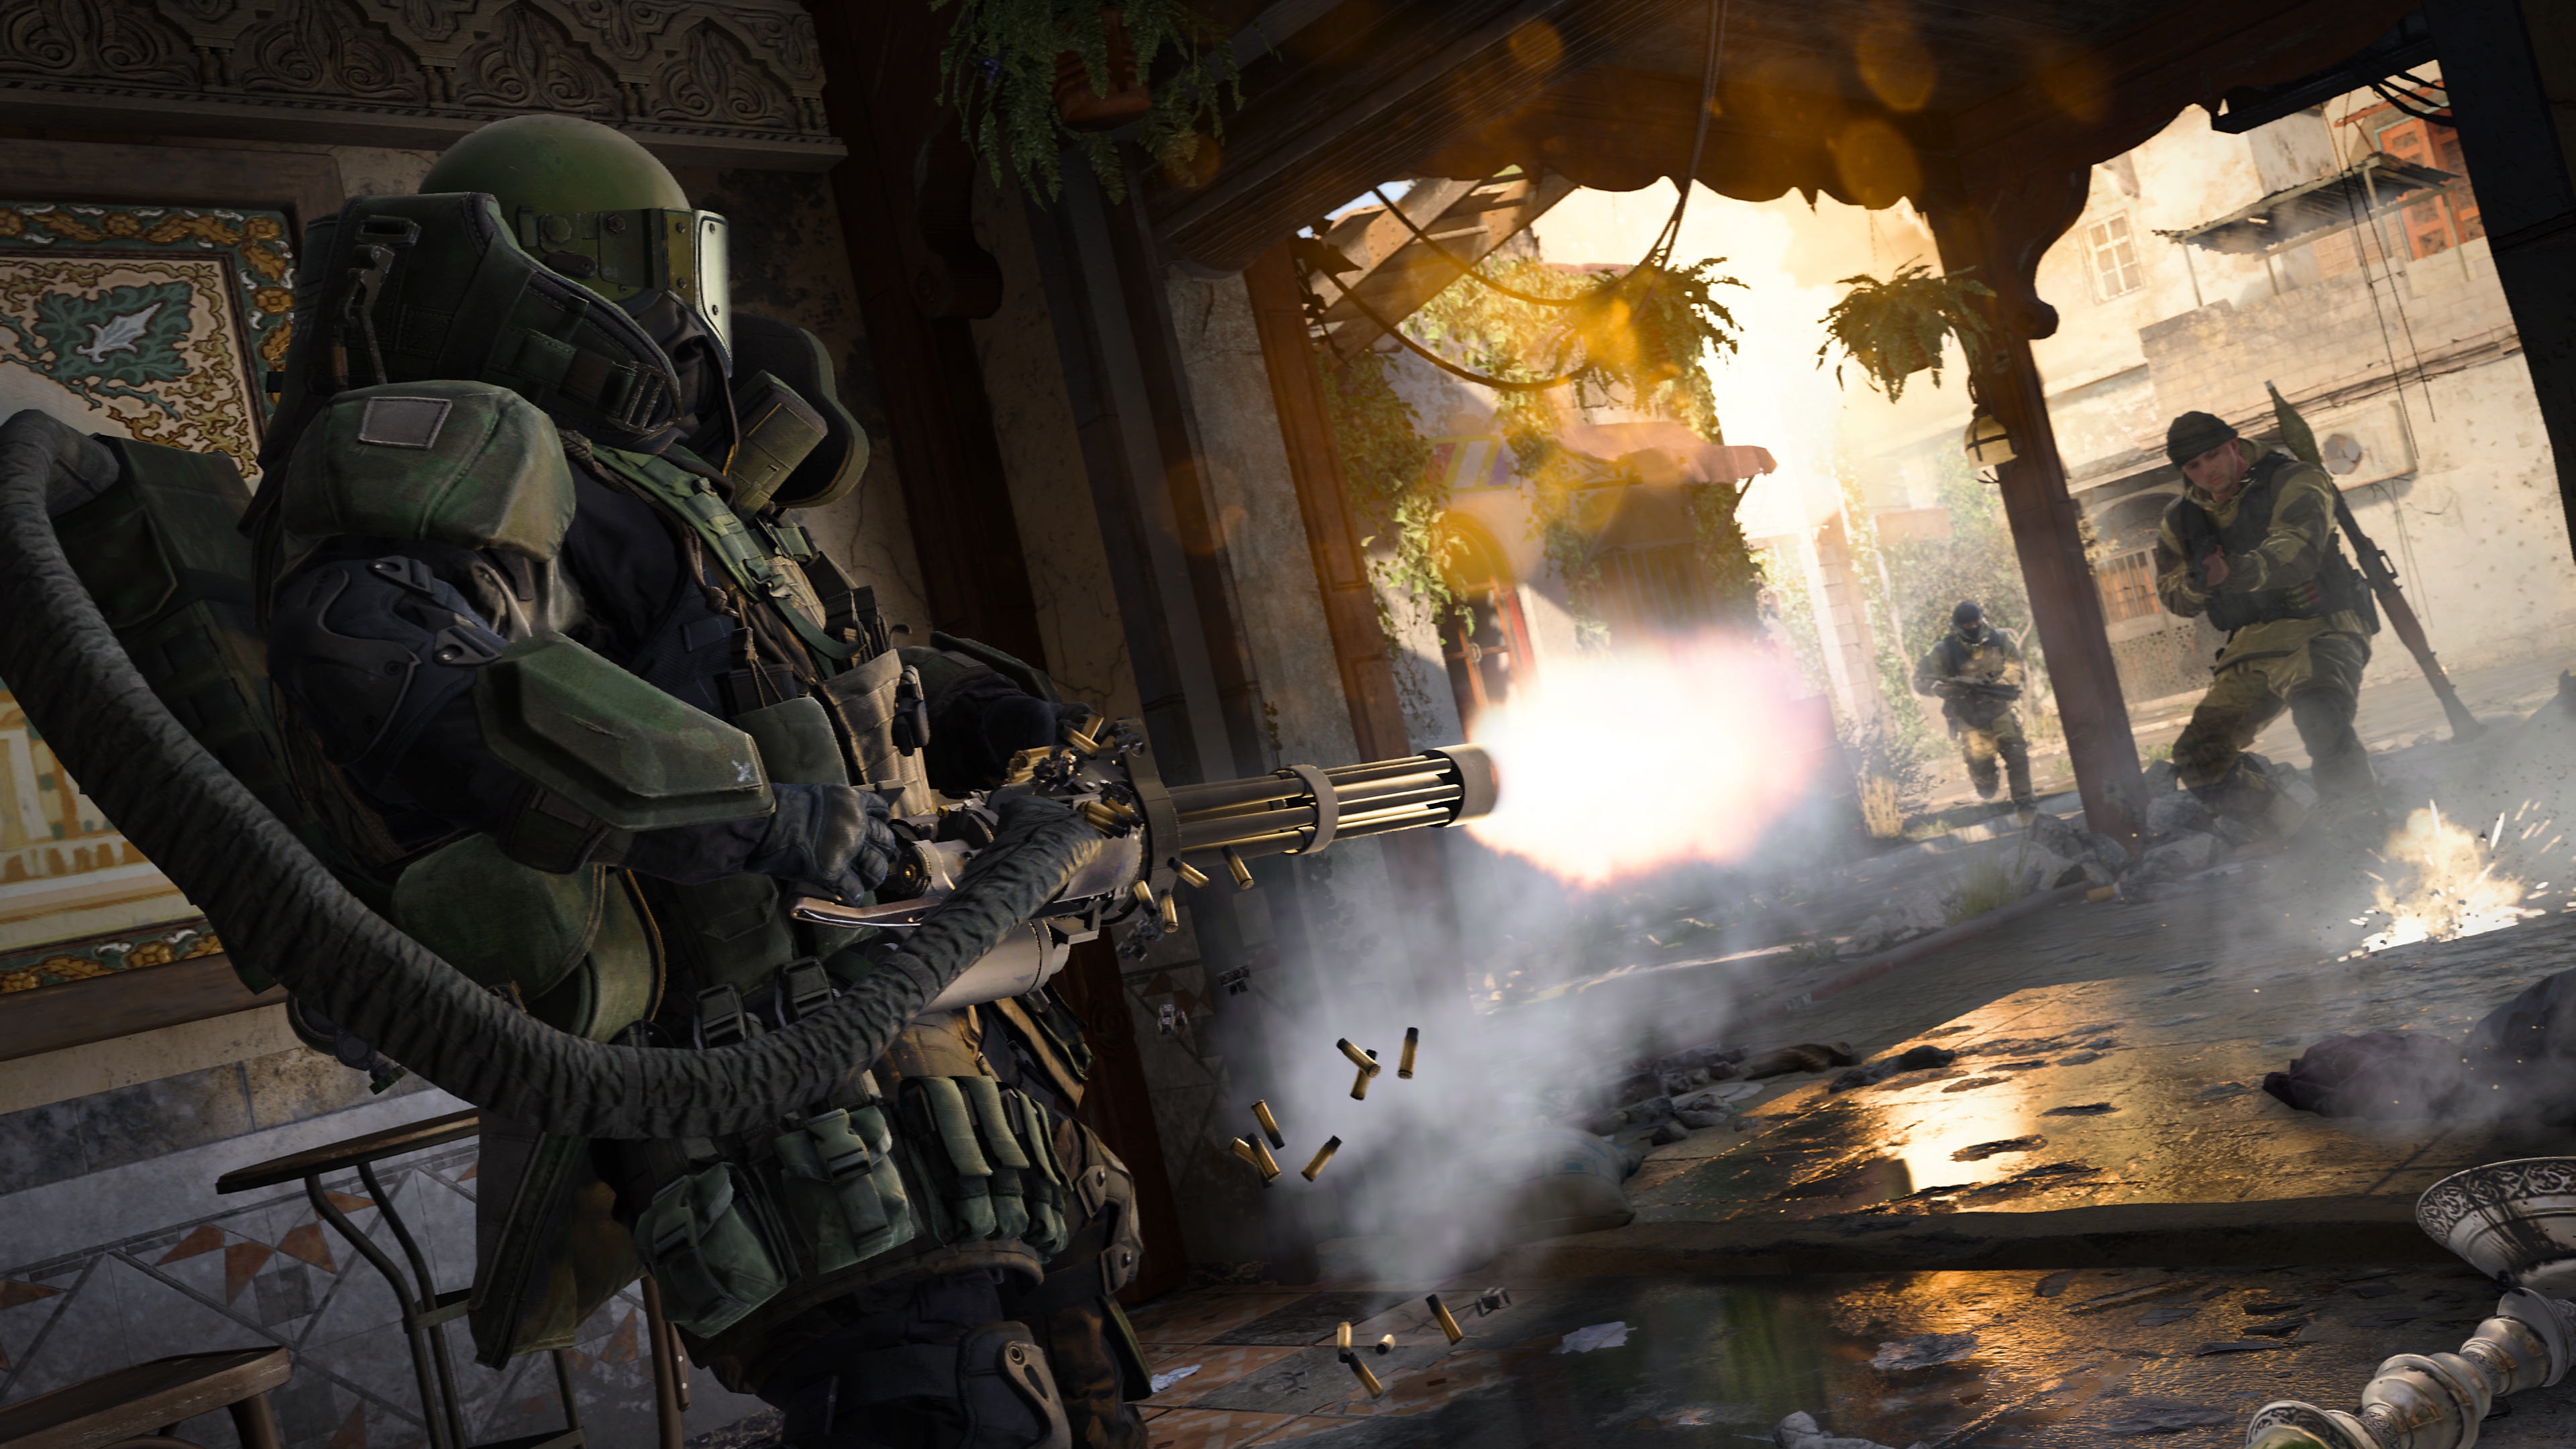 A player wearing heavy Juggernaut armor aims a minigun at another player in a bombed-out cafe in a screenshot from Call of Duty: Modern Warfare (2019)